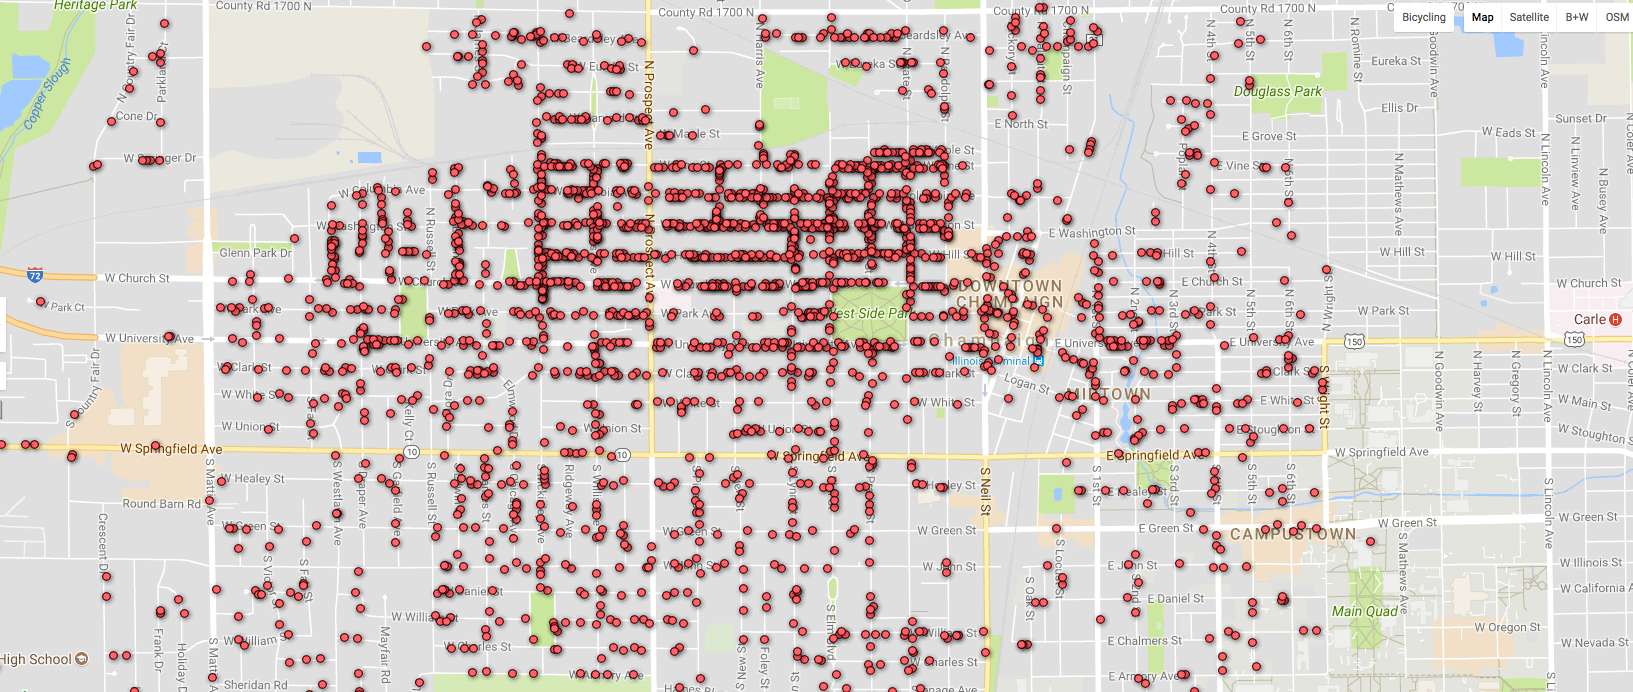 Want to know what kind of trees are in your neighborhood? This map may be able to help